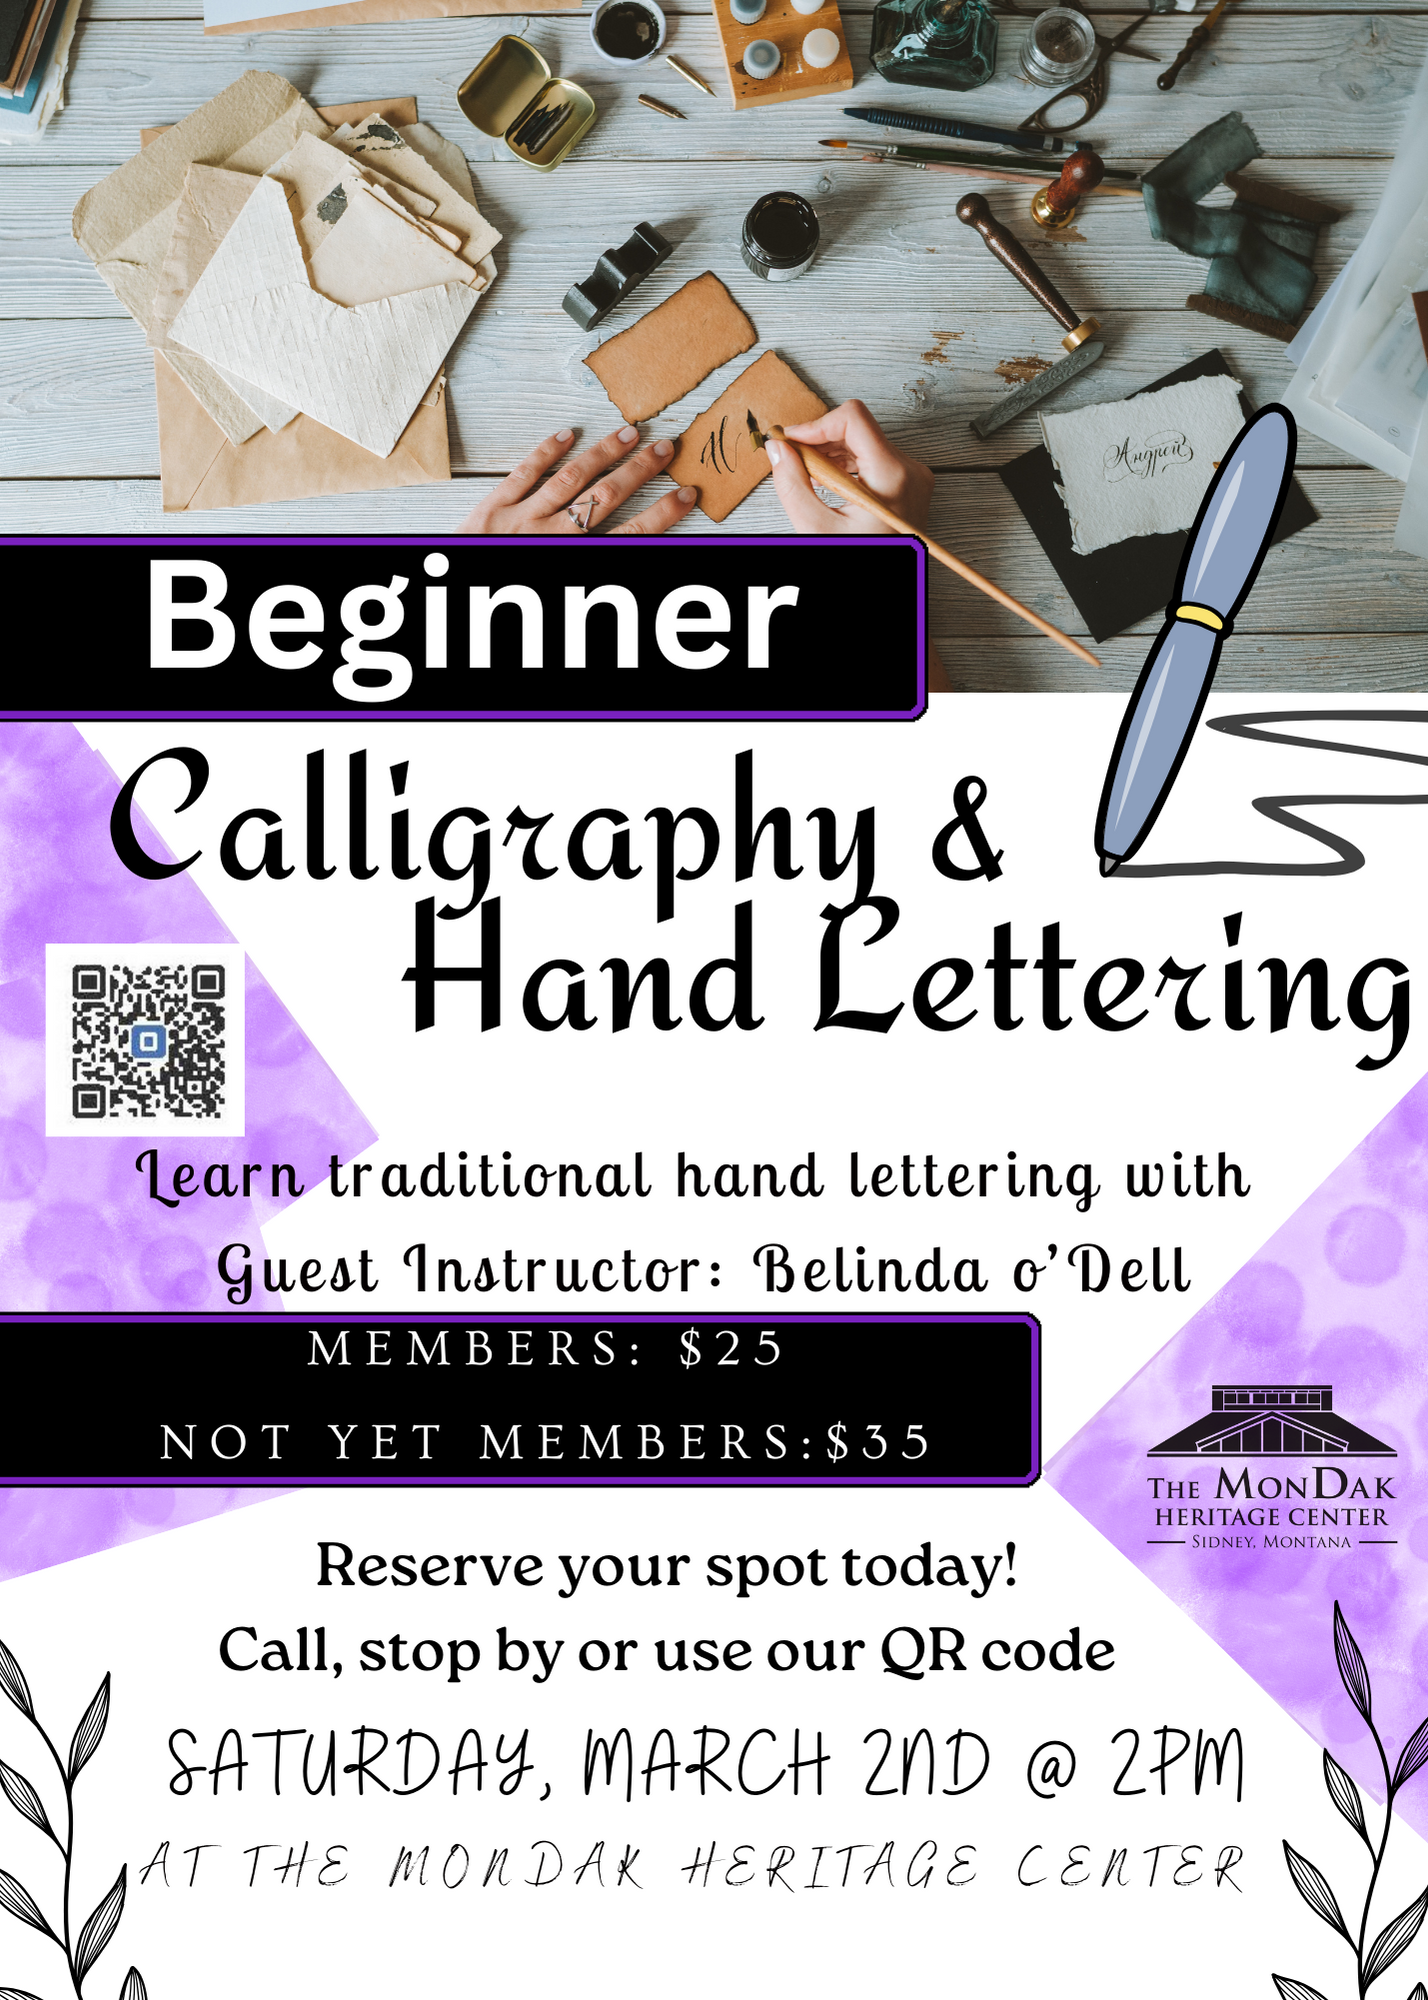 Calligraphy & Hand Lettering